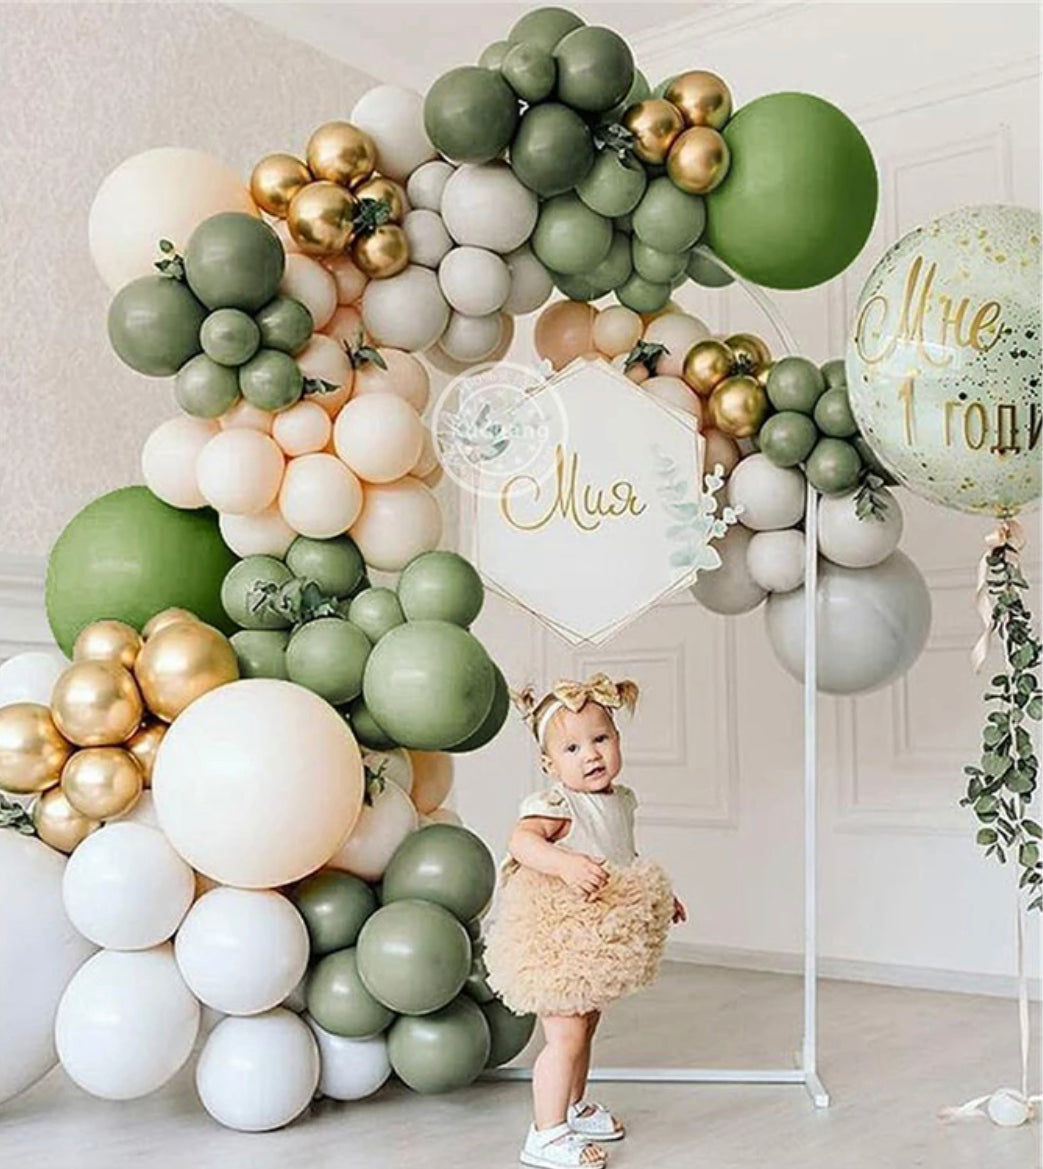 Party Balloons-136 Pieces Of Diy Gold And Black Garland Balloon